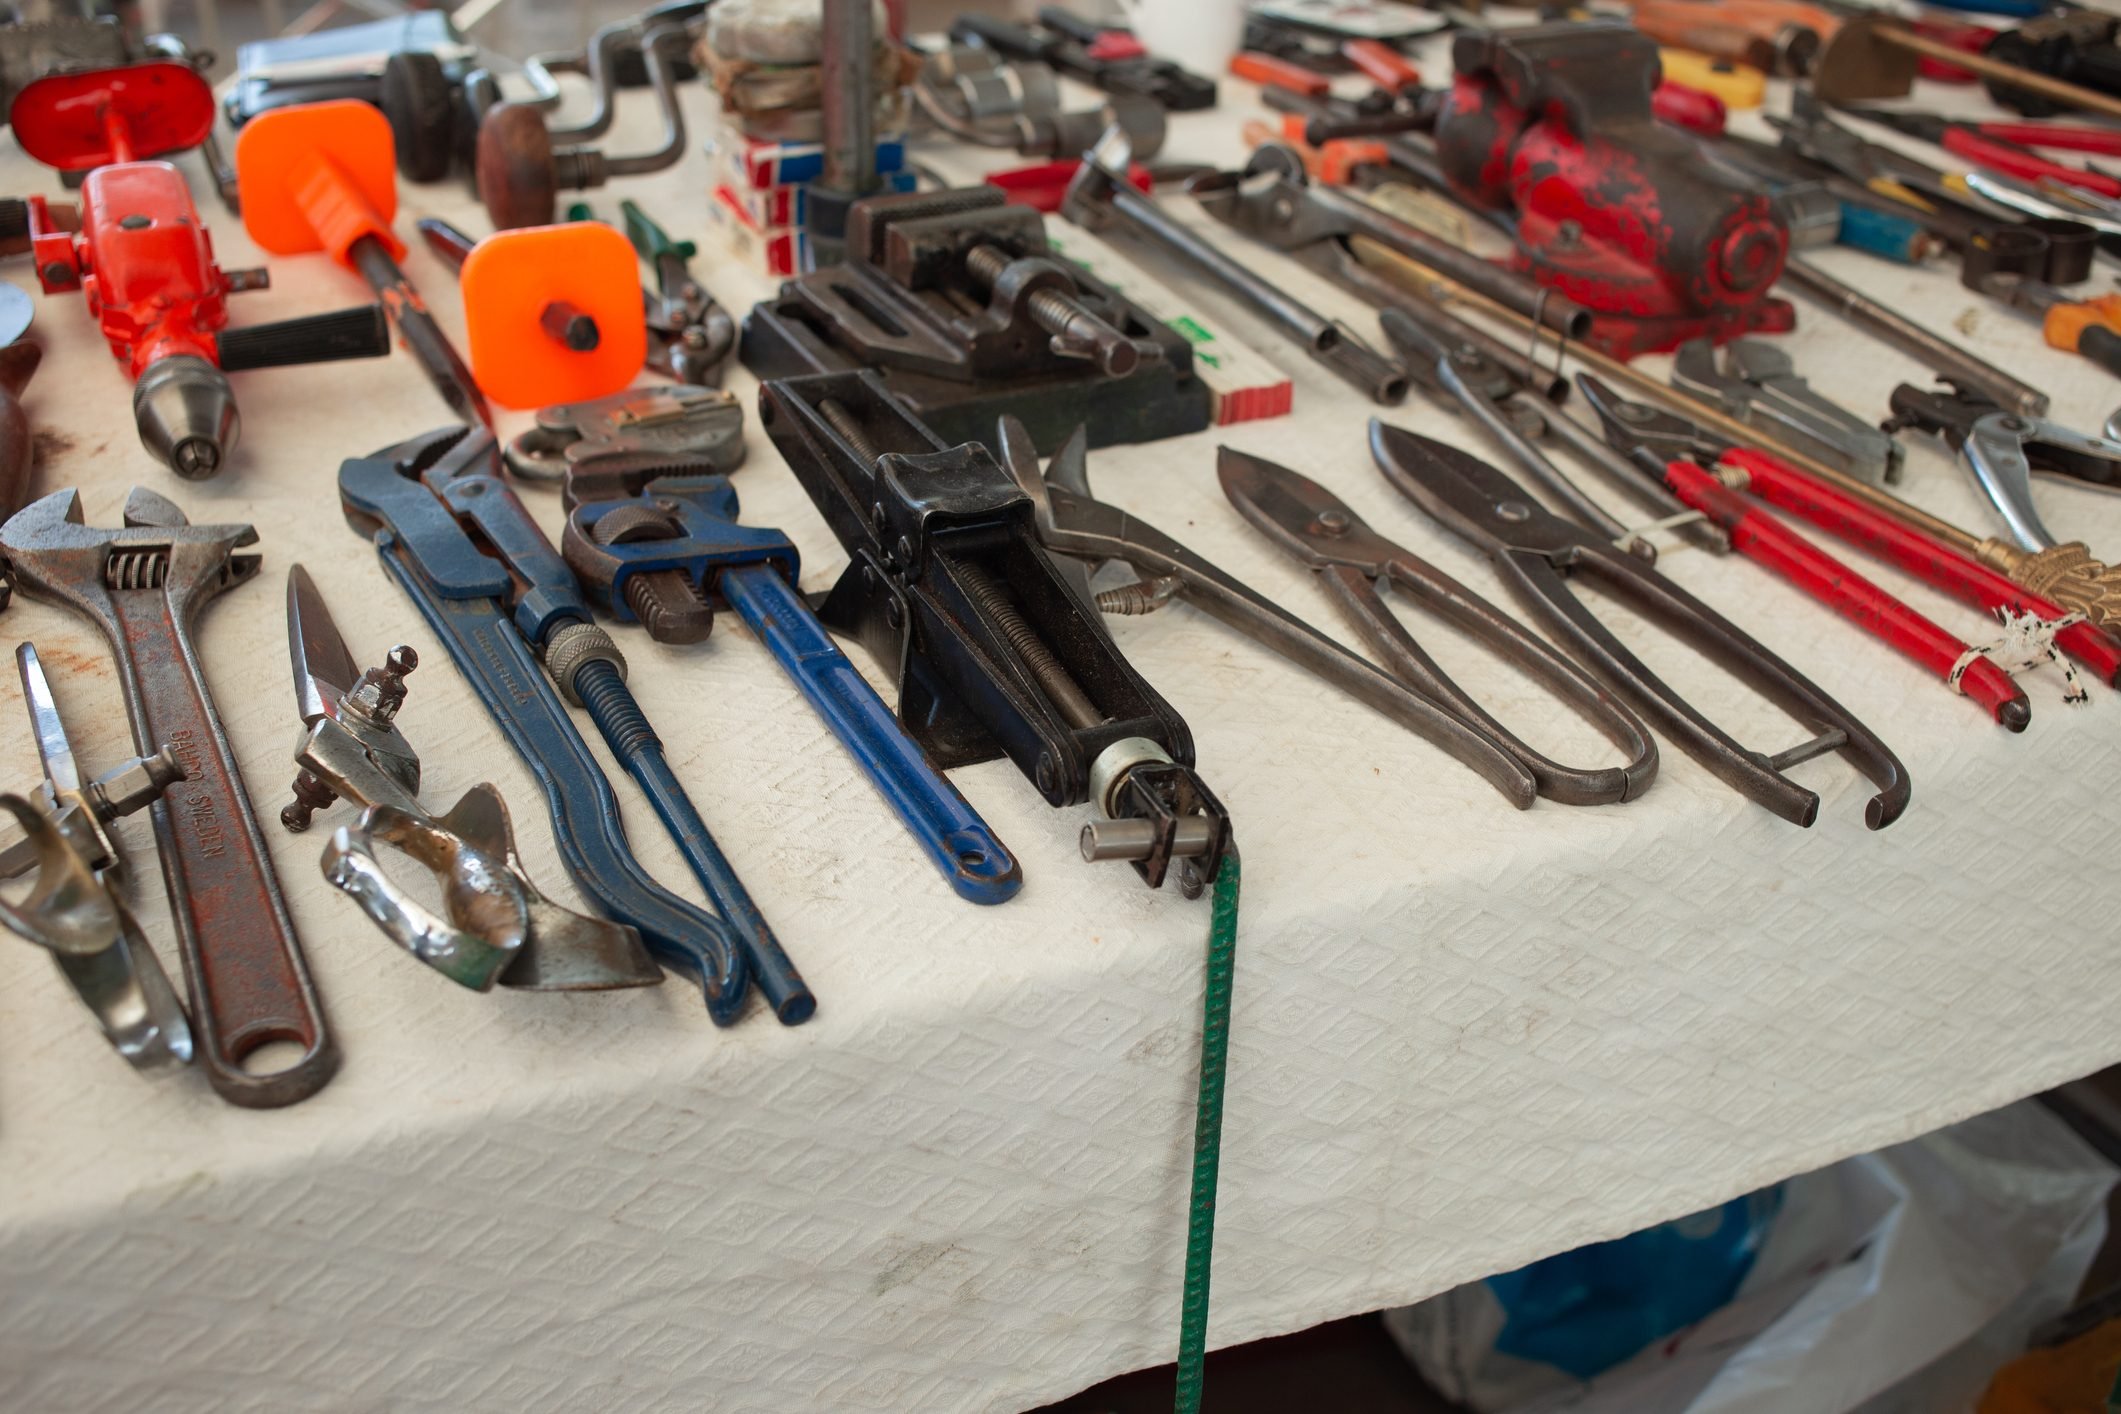 Tips for Buying Used Tools